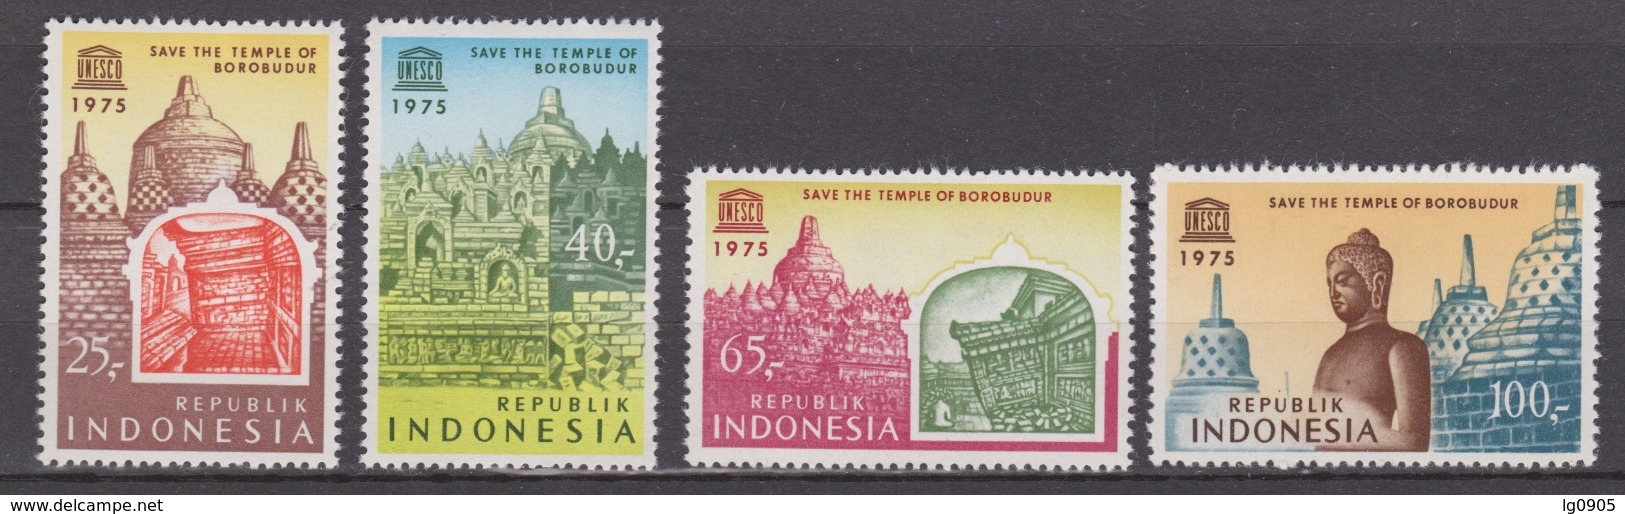 Indonesia Indonesie 824-827 MNH UNESCO Burobudur 1975 ; NOW MANY STAMPS INDONESIA VERY CHEAP - Indonesië